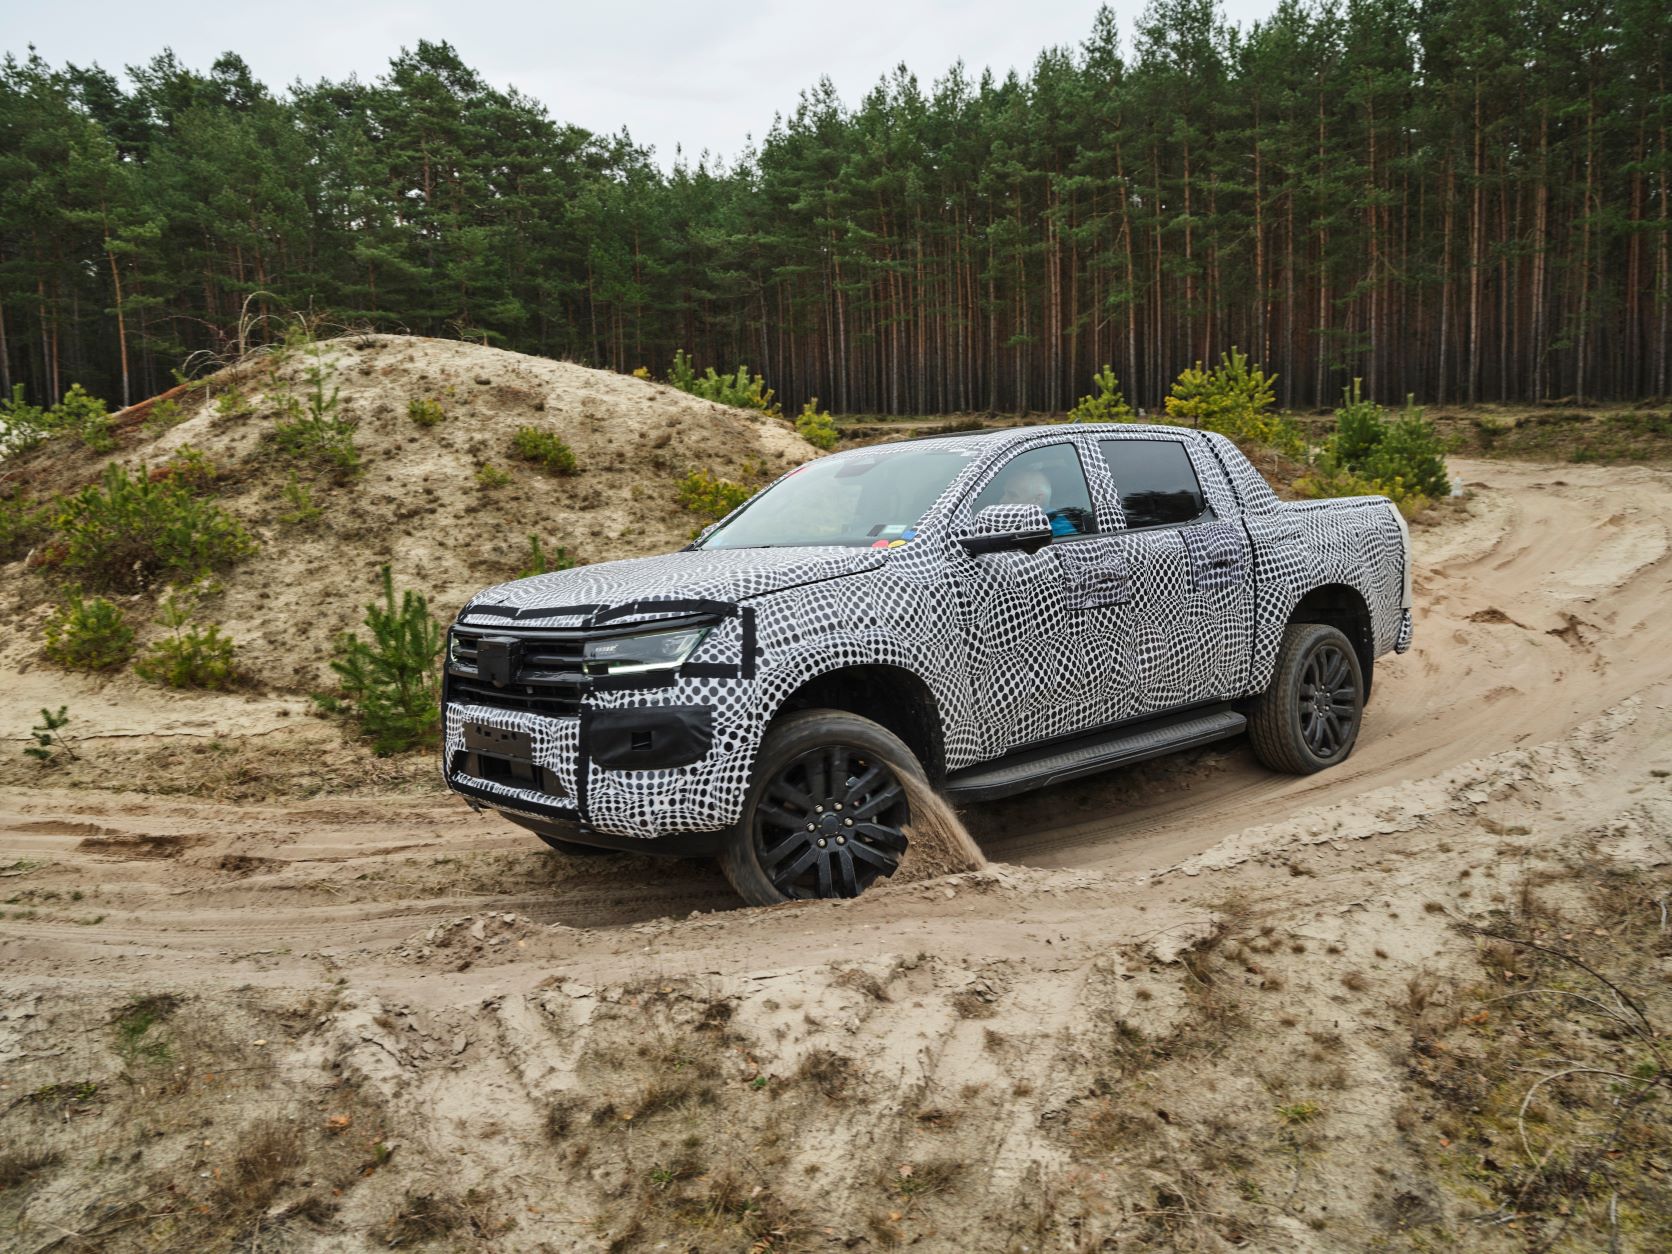 Front three quarters view of the Volkswagen Amarok off road testing